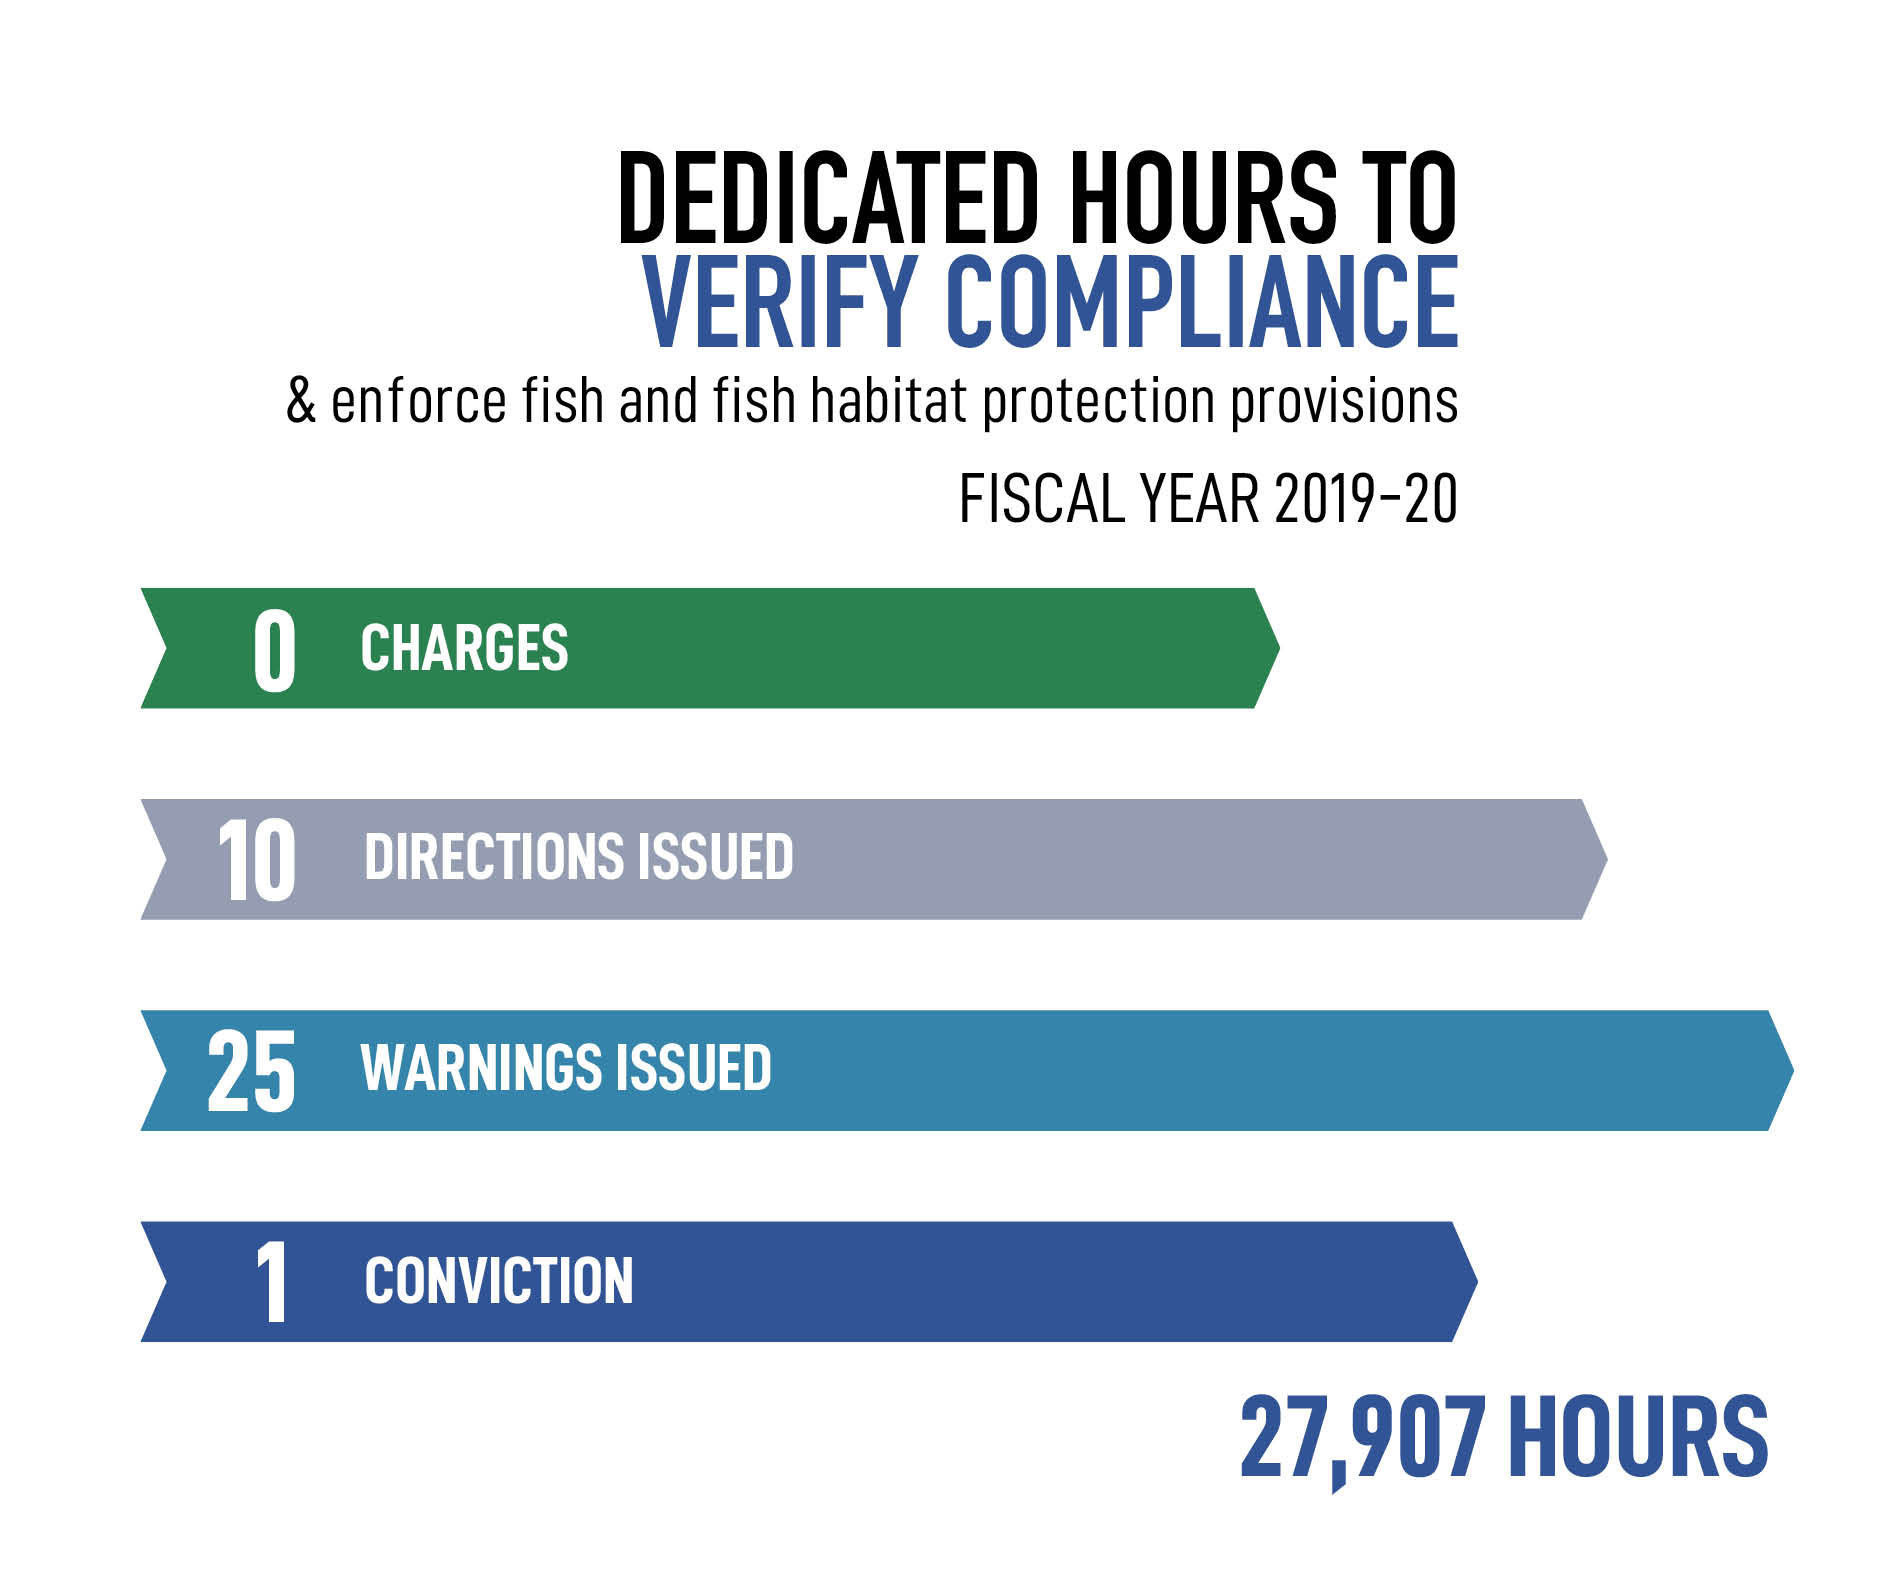 Infographic showing fishery officer hours and enforcement activities in fiscal year 2019-20, as described in Section 2.4.